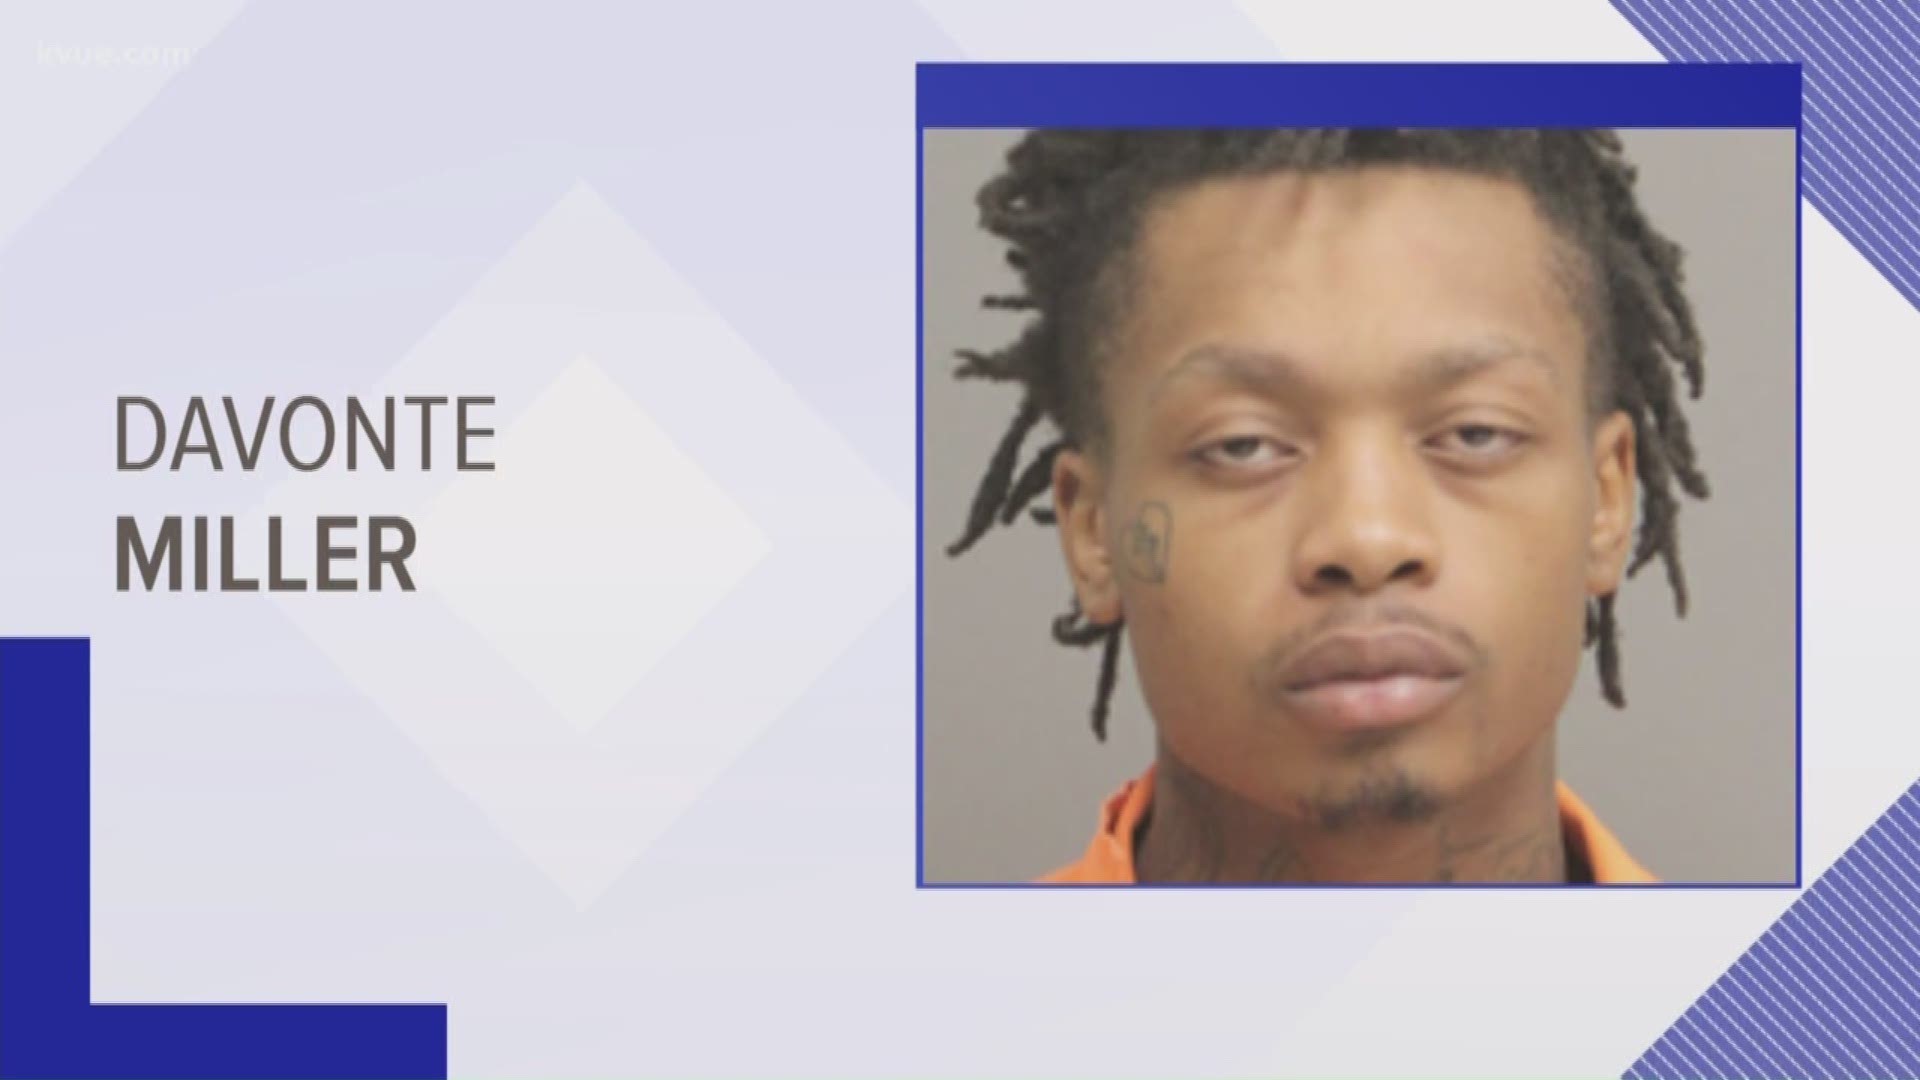 A man already in jail in Louisiana is now facing a capital murder charge for the death of a teenager in Kyle.